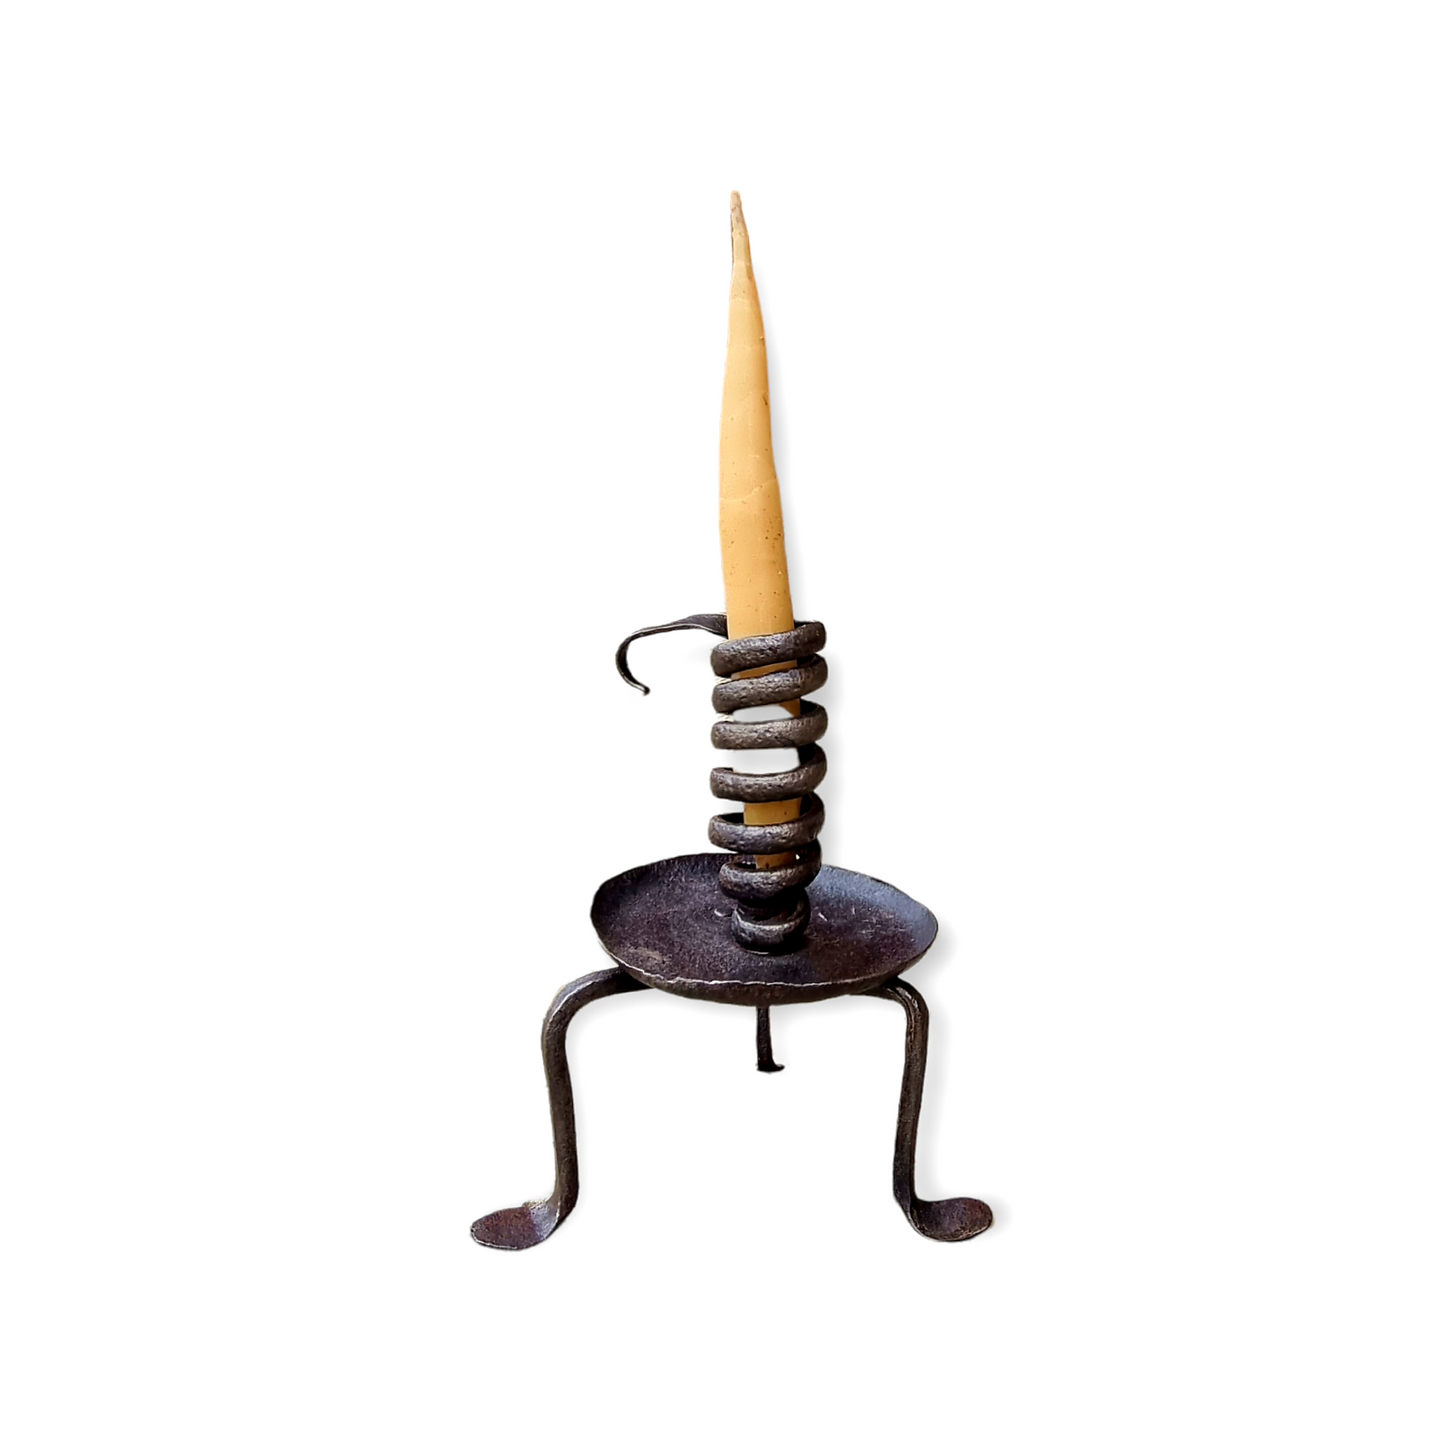 Late 18th Century Primitive Antique Wrought Iron Candleholder or Rat Tail Candleholder